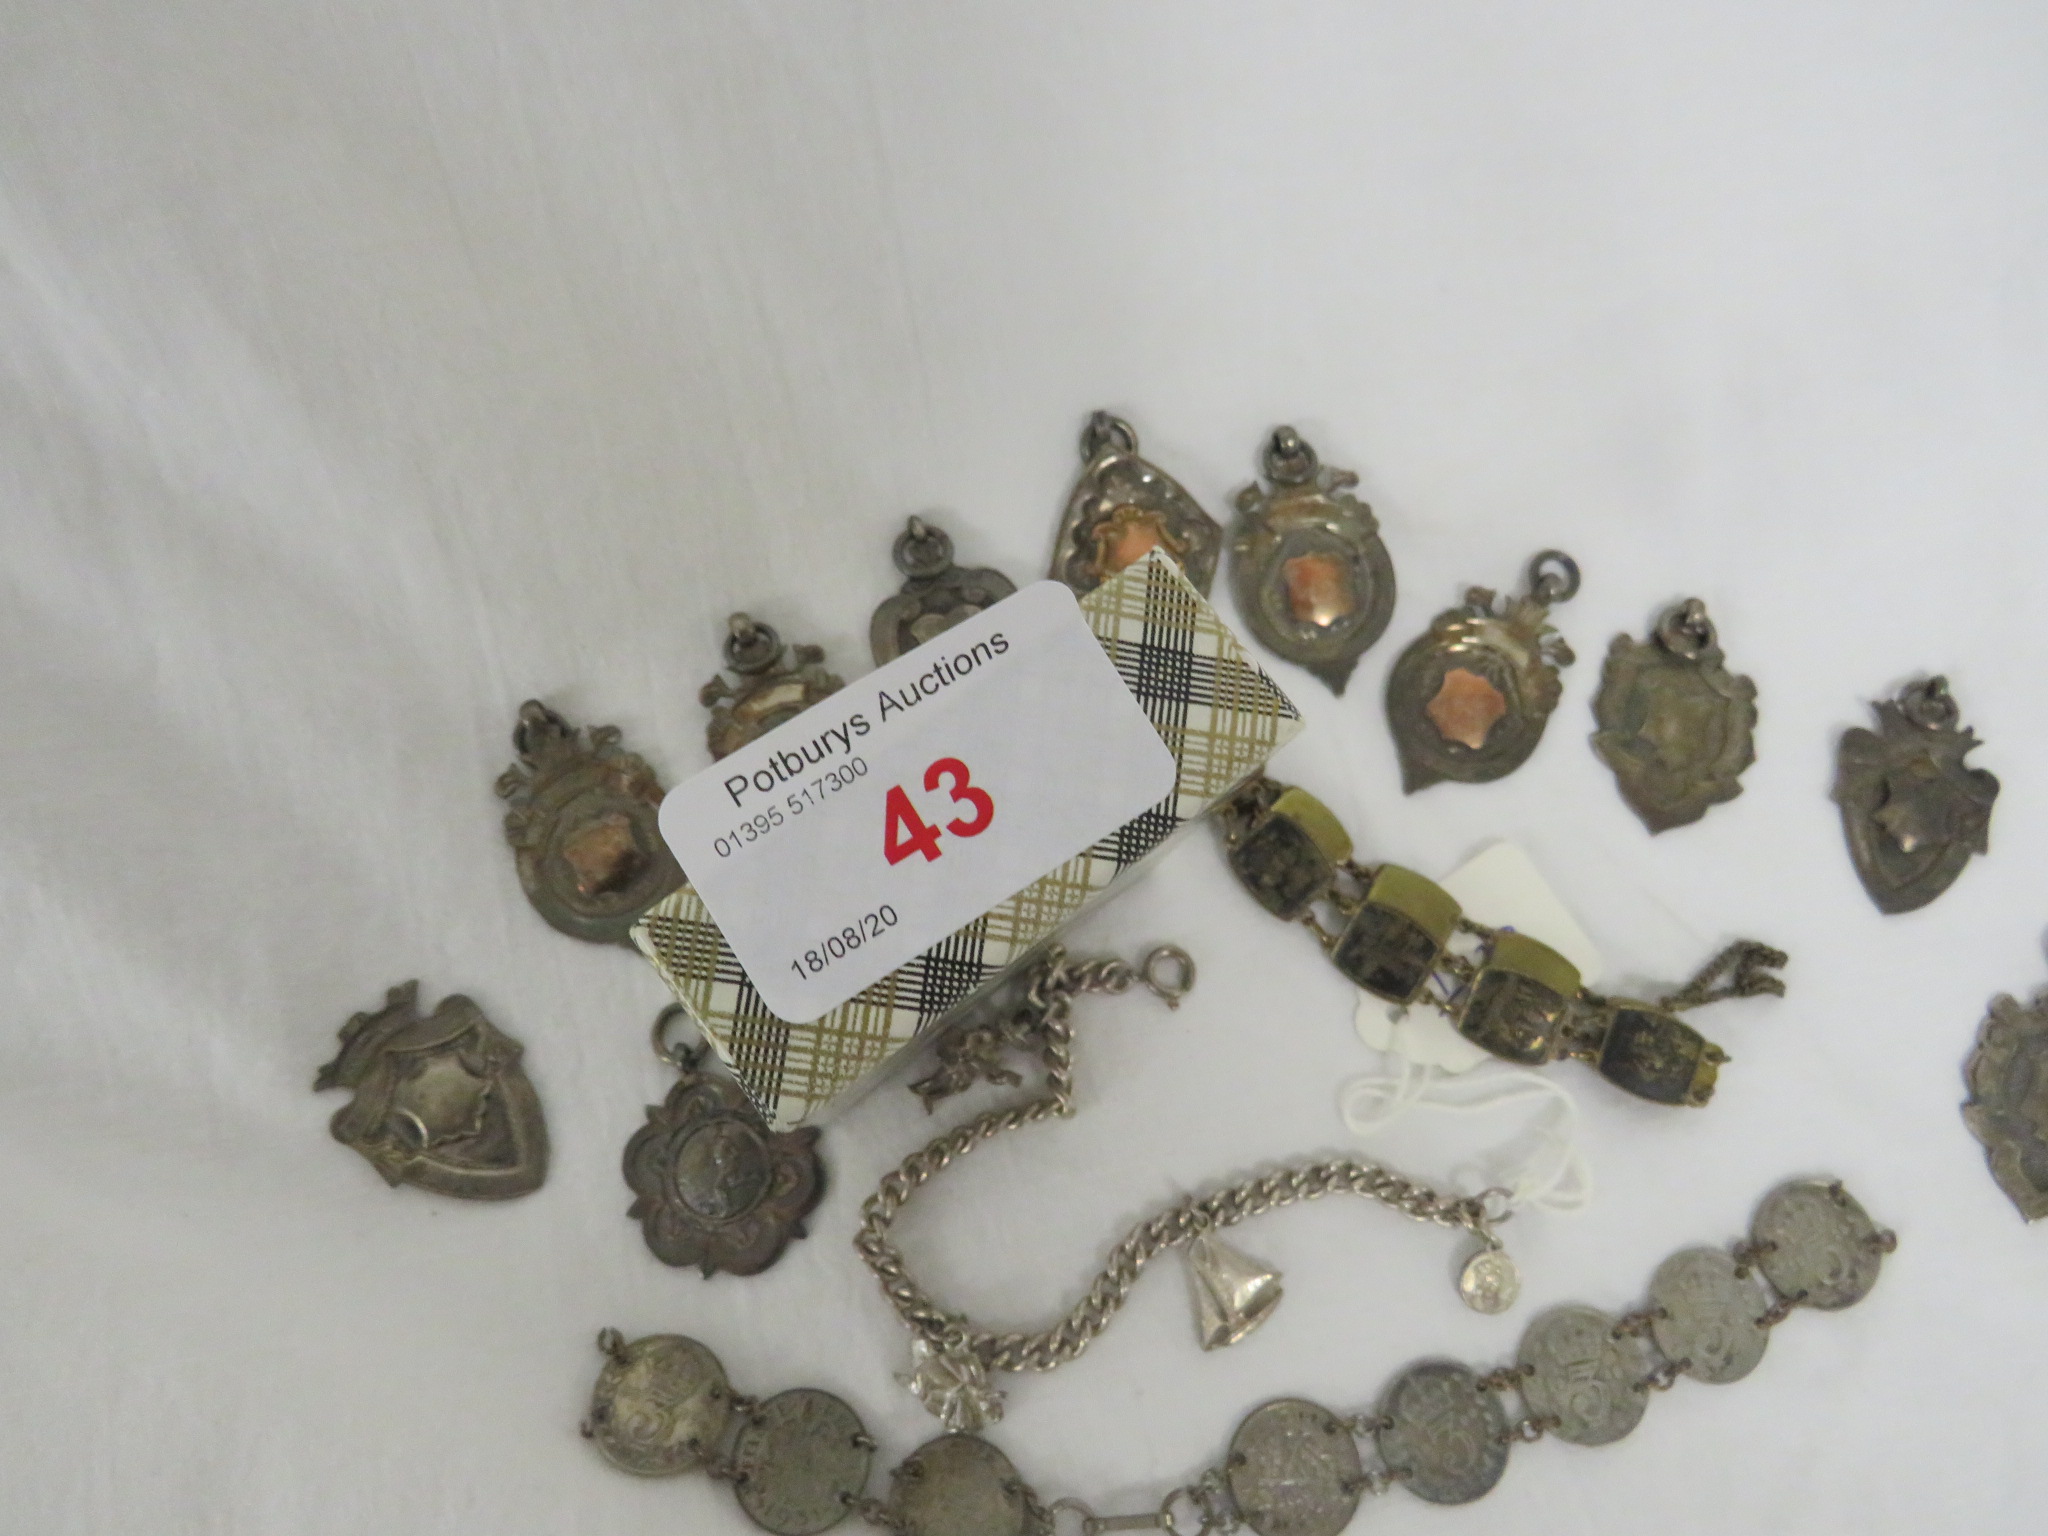 A SILVER FOOTBALL MEDALLION AND TEN OTHER SILVER MEDALLIONS, A CHARM BRACELET, SILVER THREEPENCE - Image 4 of 4